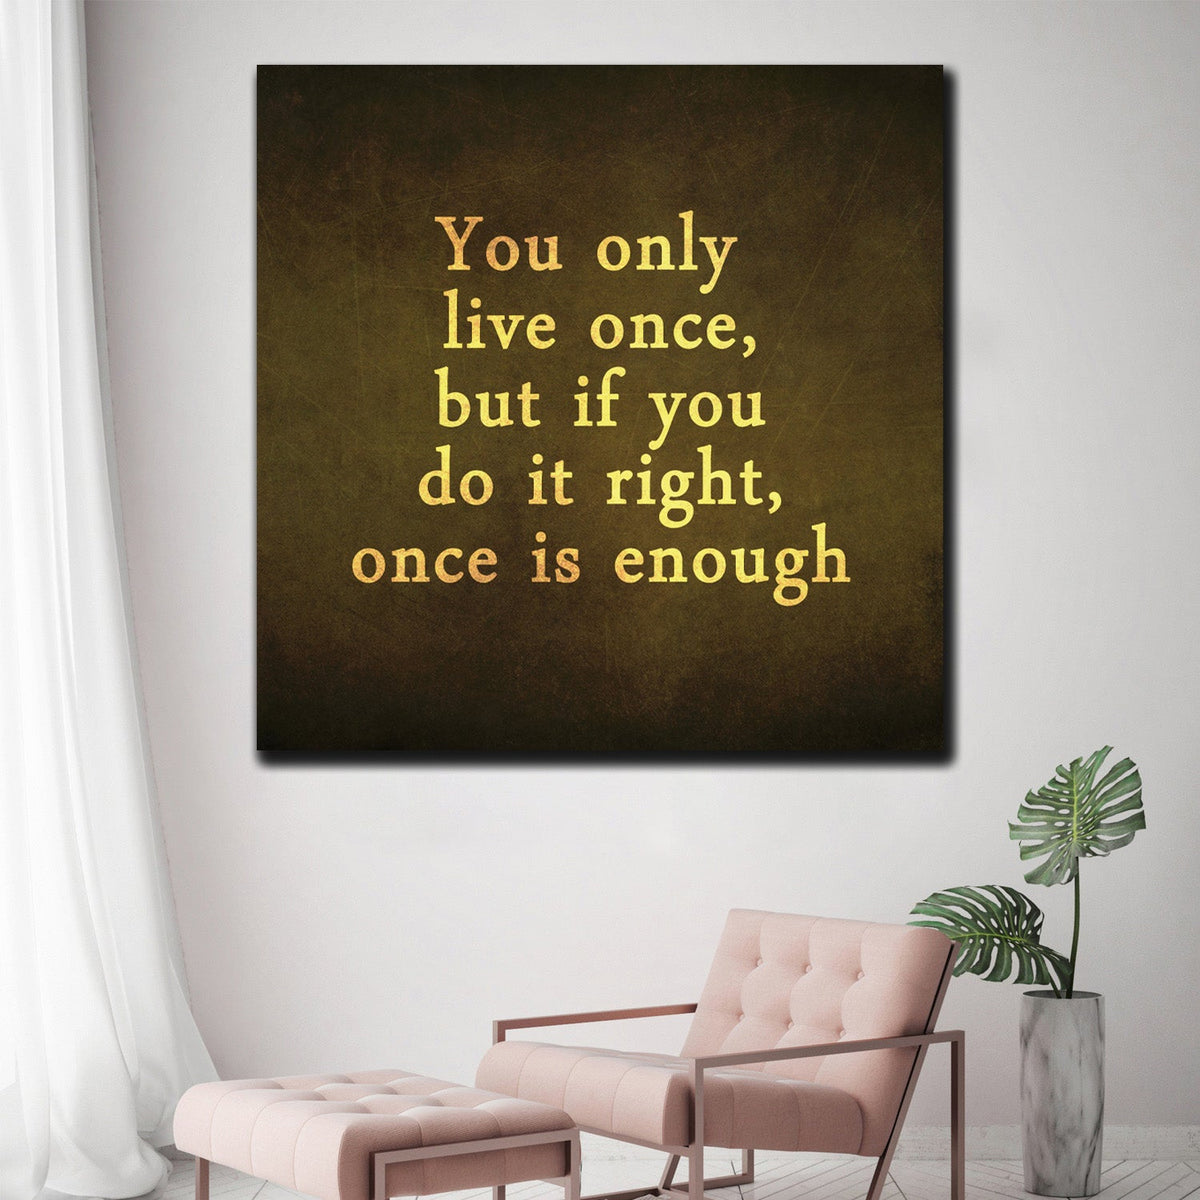 https://cdn.shopify.com/s/files/1/0387/9986/8044/products/YouOnlyLiveOnceCanvasArtprintStretched-2.jpg